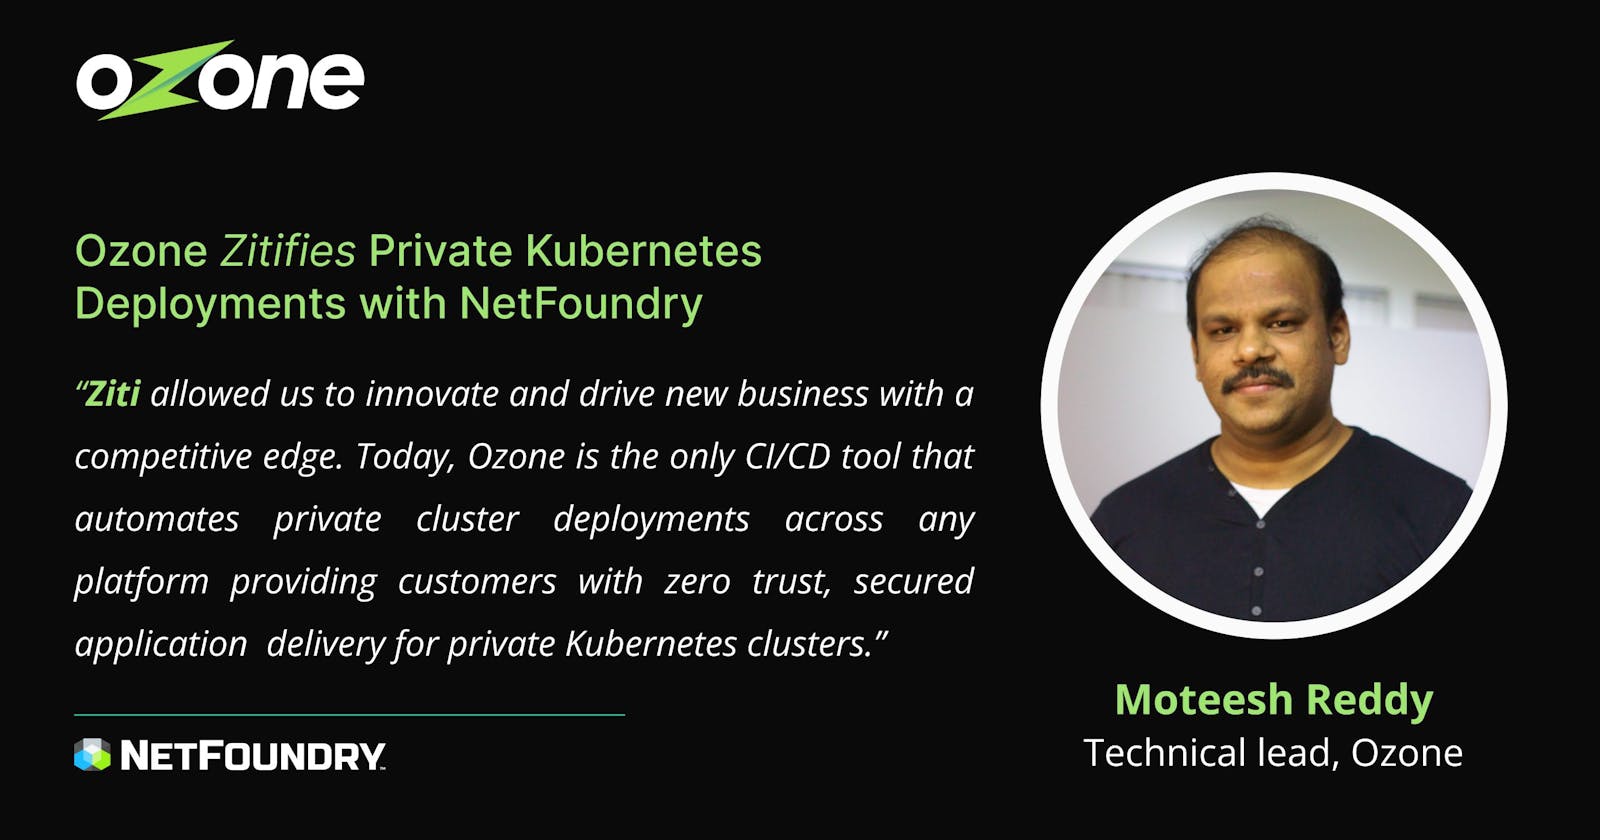 Ozone Zitifies Private Kubernetes Deployments with NetFoundry